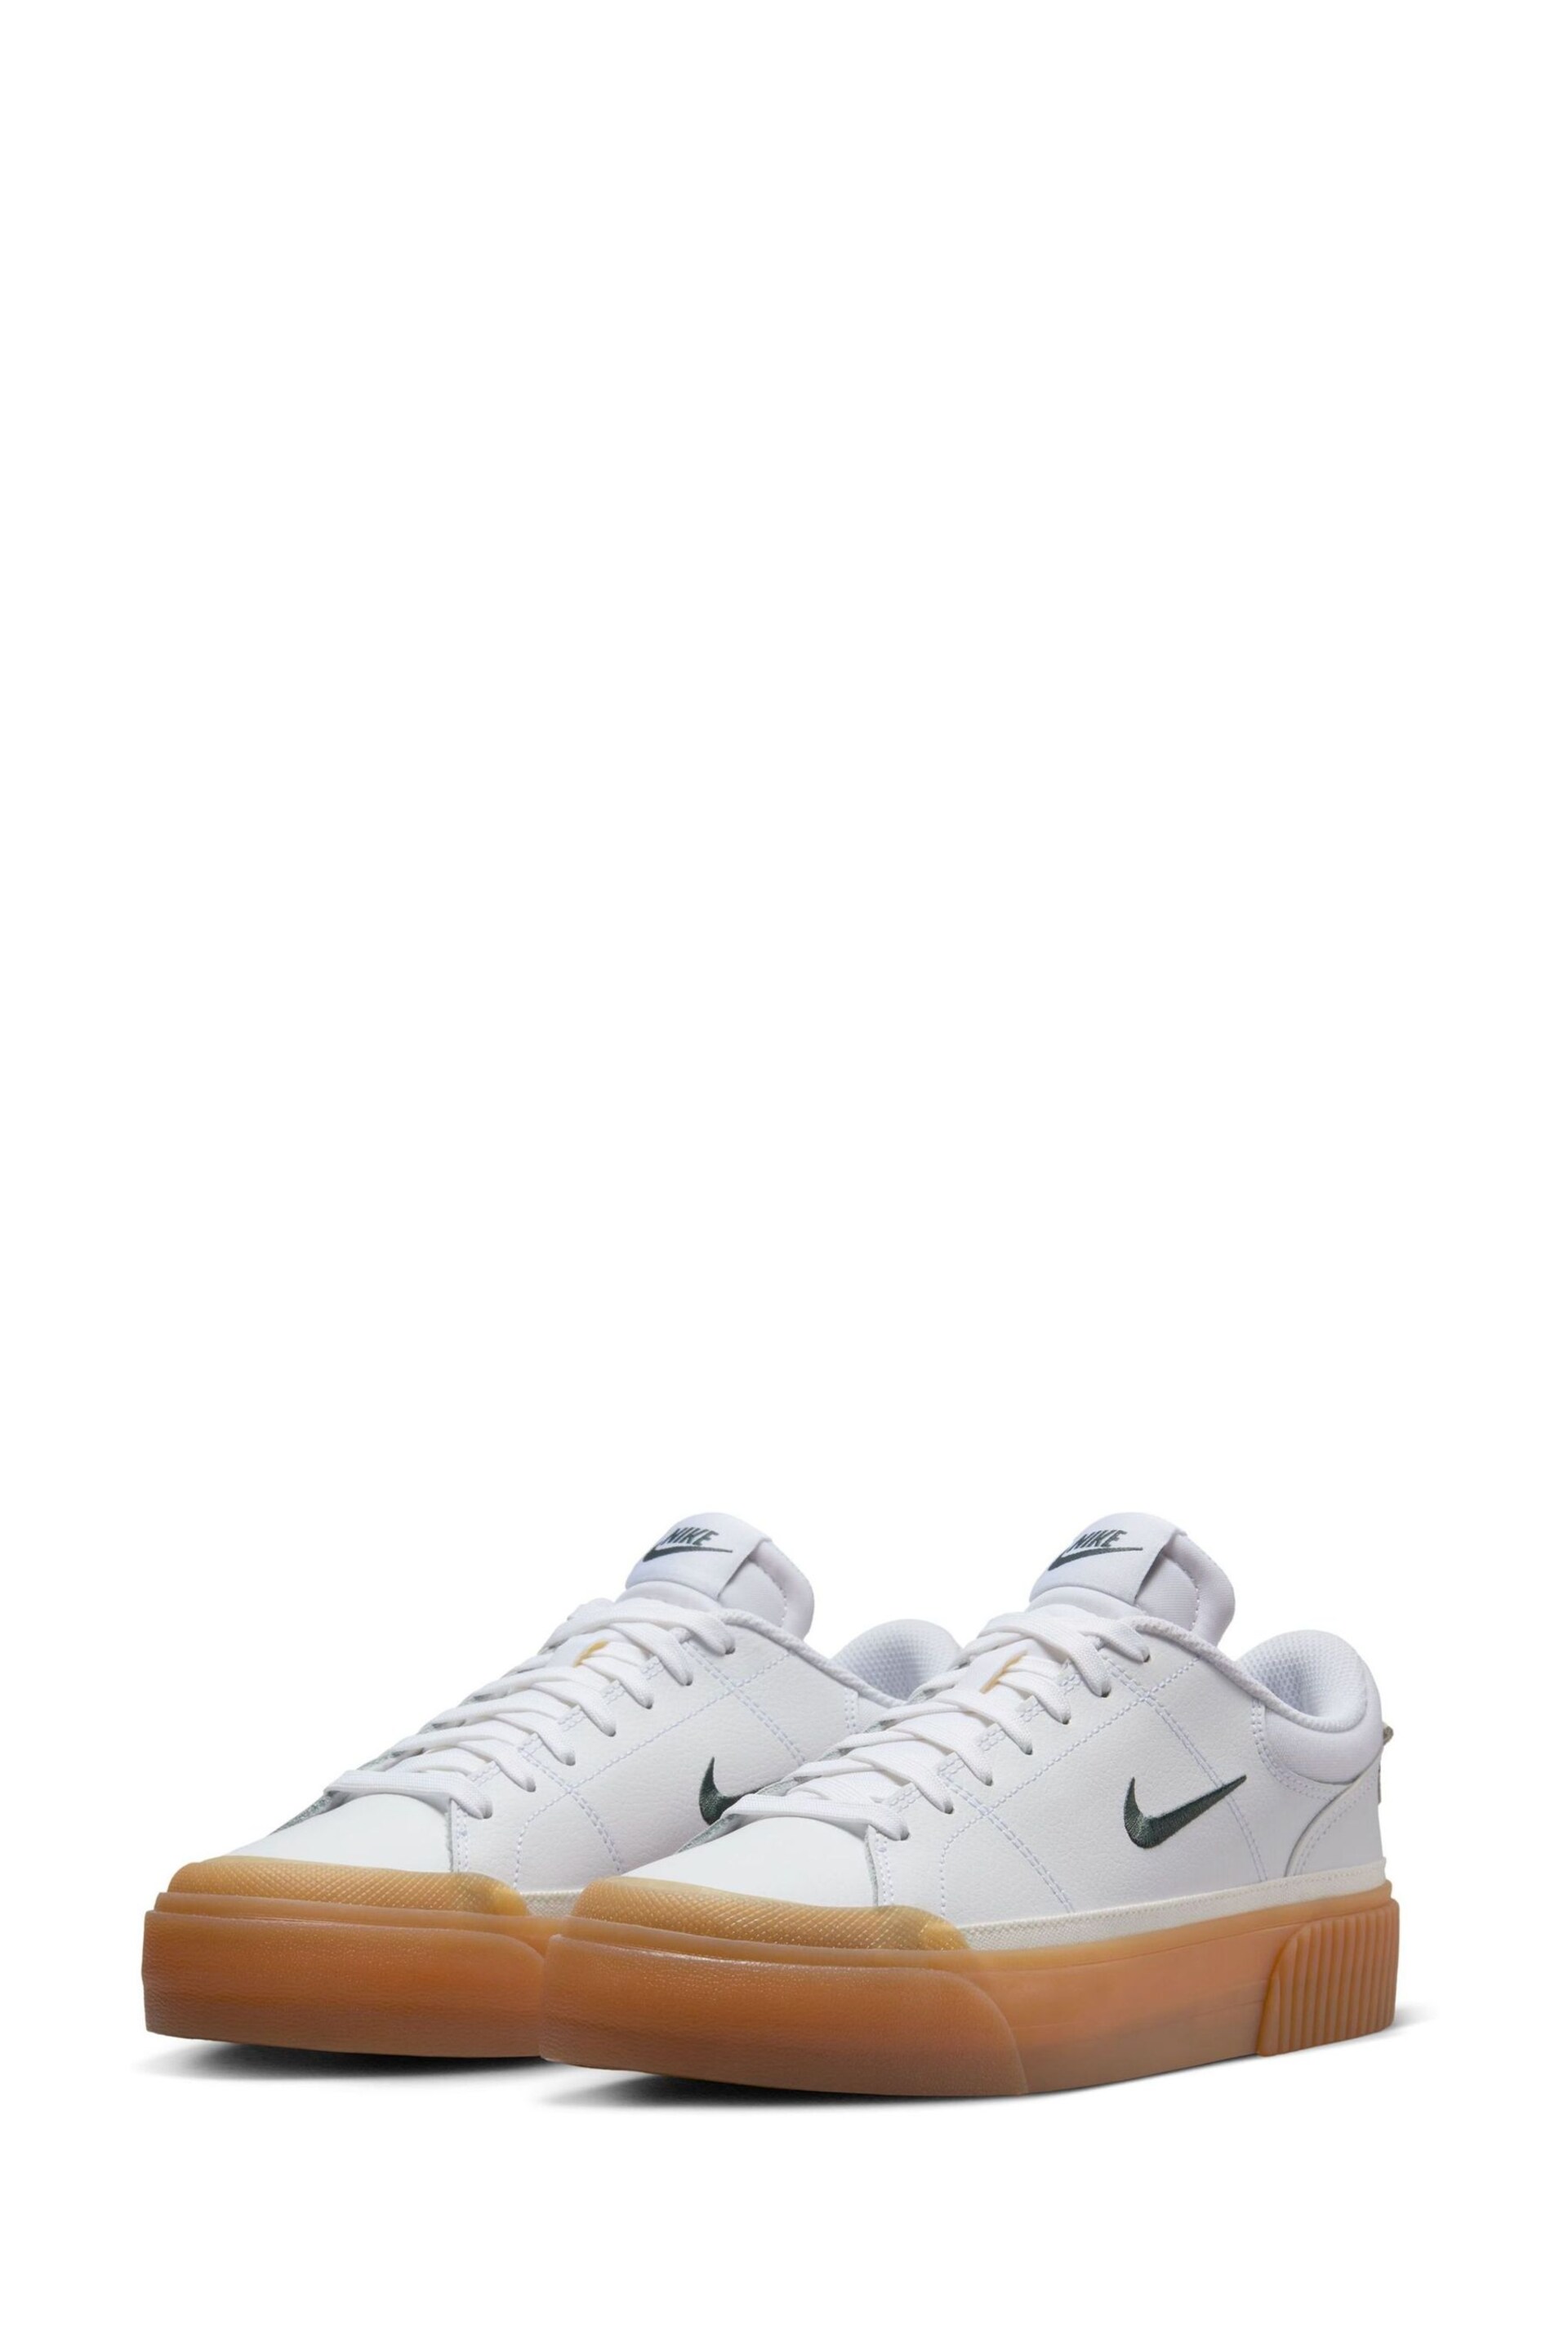 Nike White Court Legacy Lift Trainers - Image 5 of 11